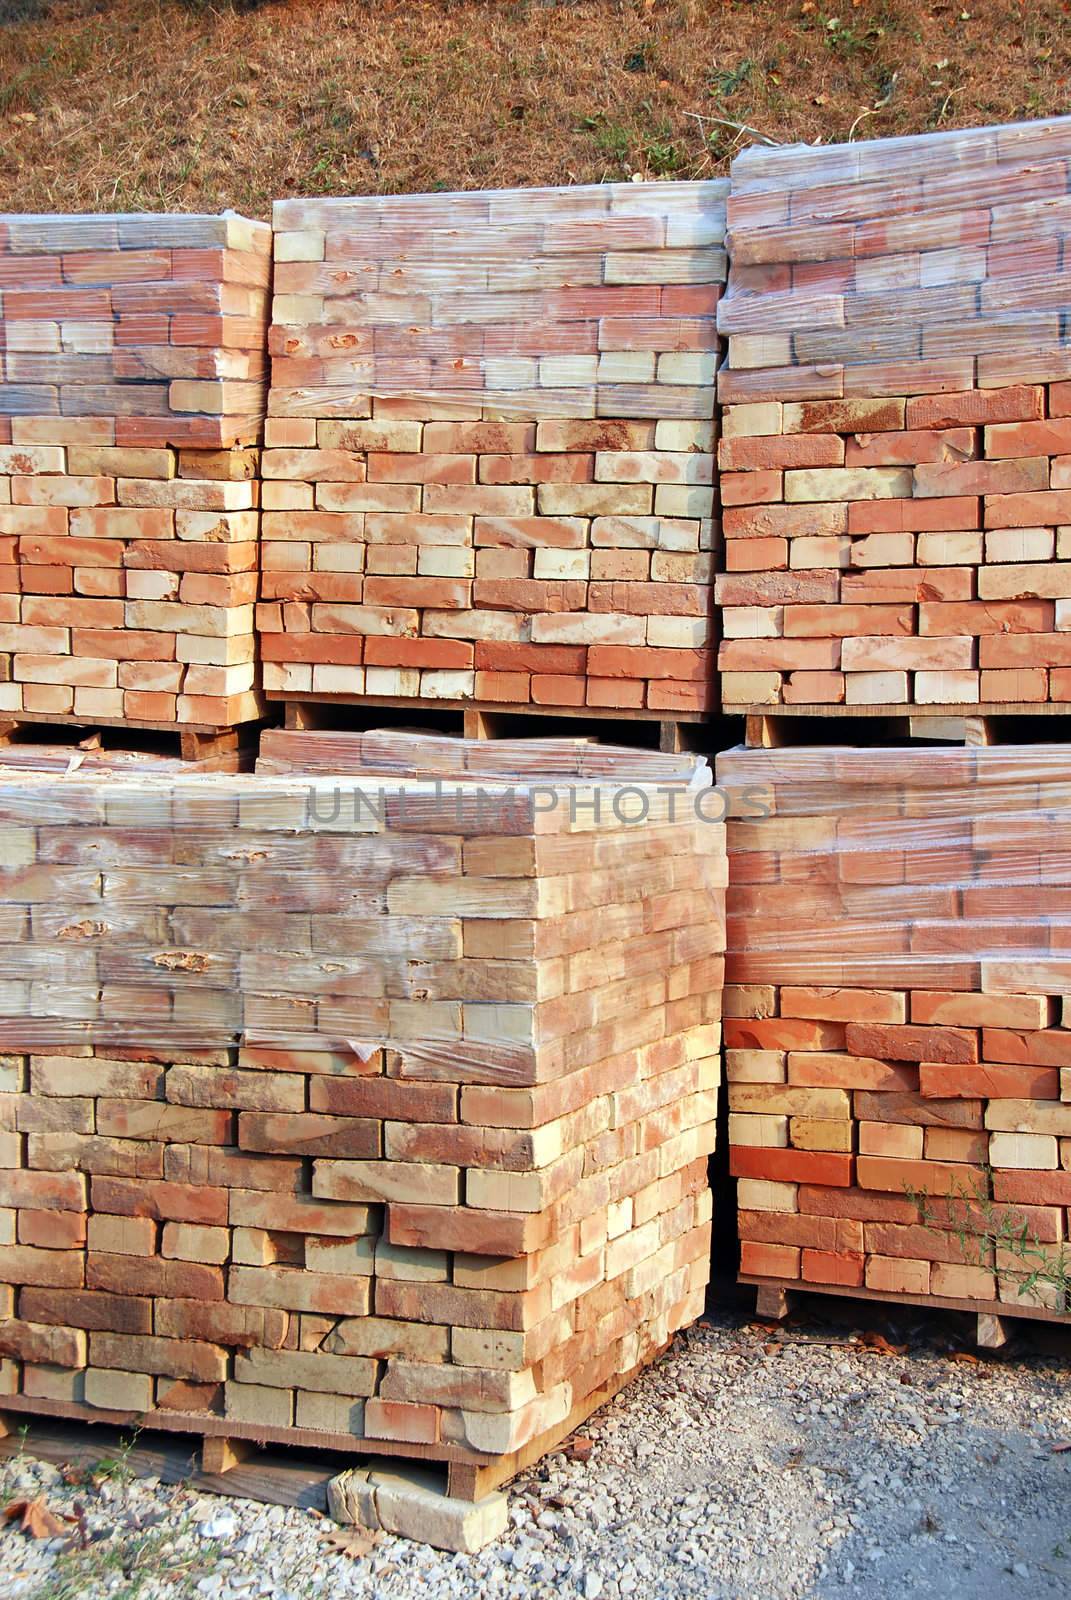 stacks of packed bricks outdoor, building material